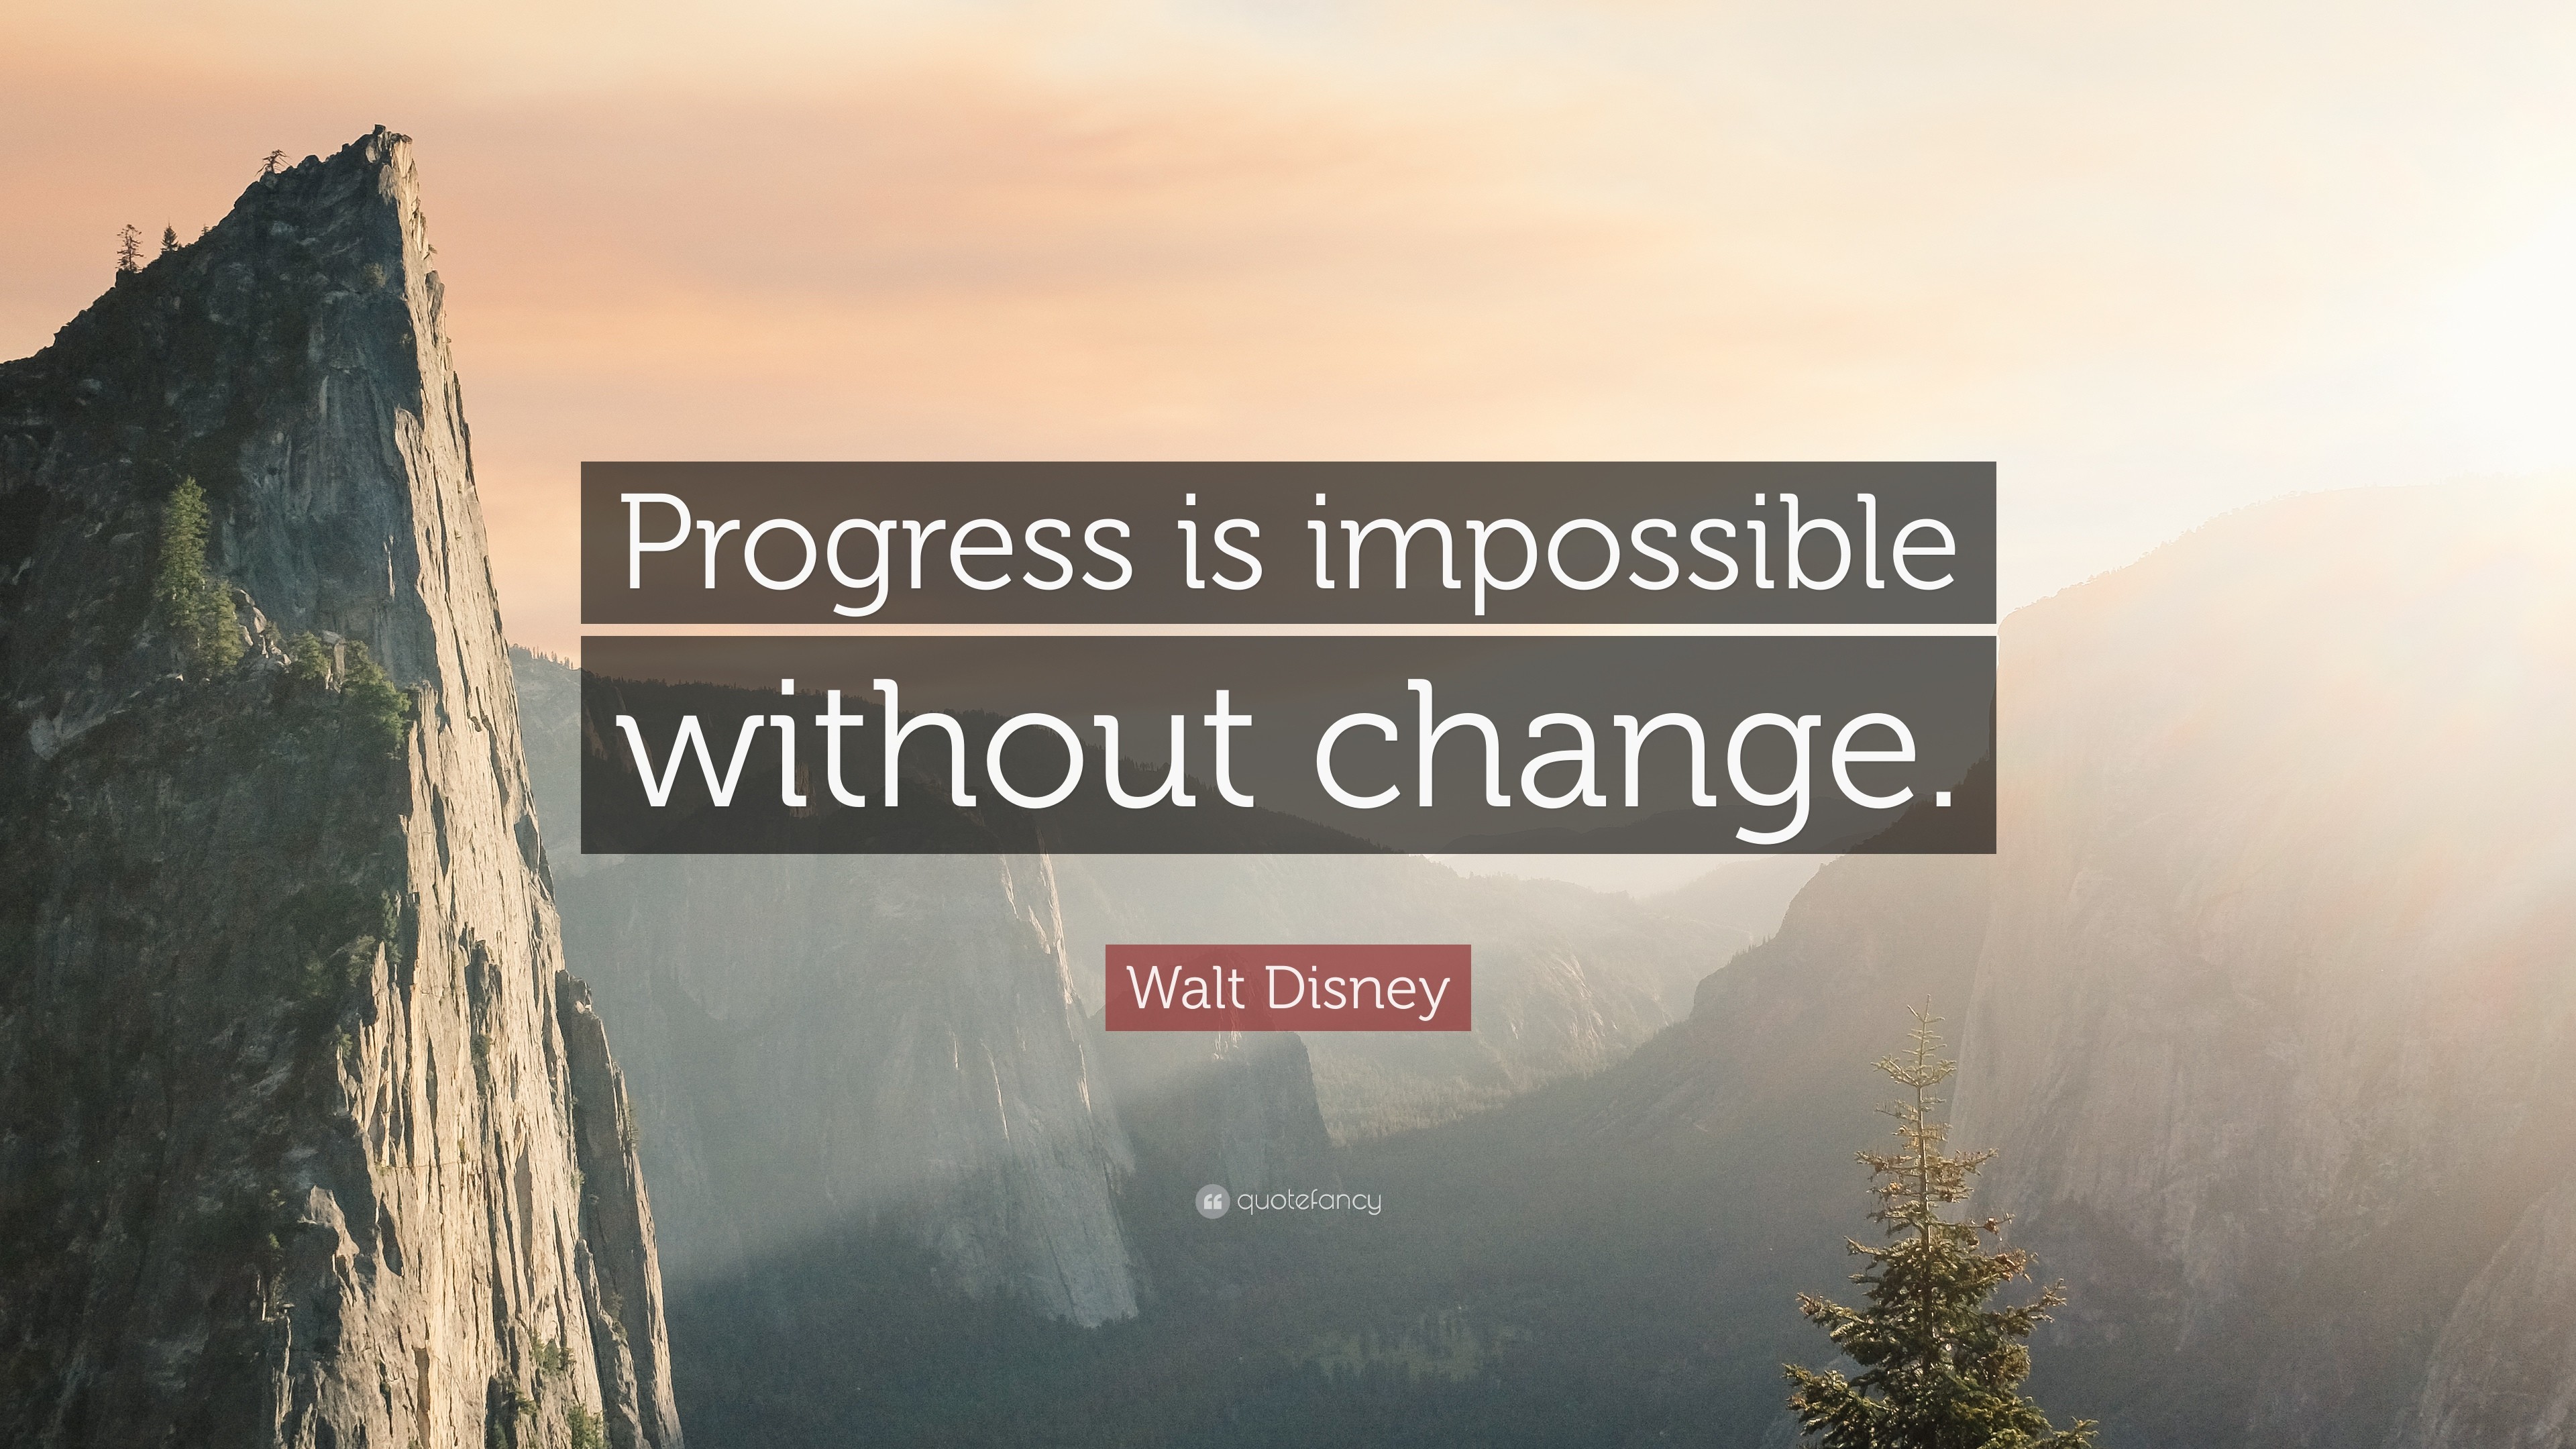 Walt Disney Quote Progress is impossible without change